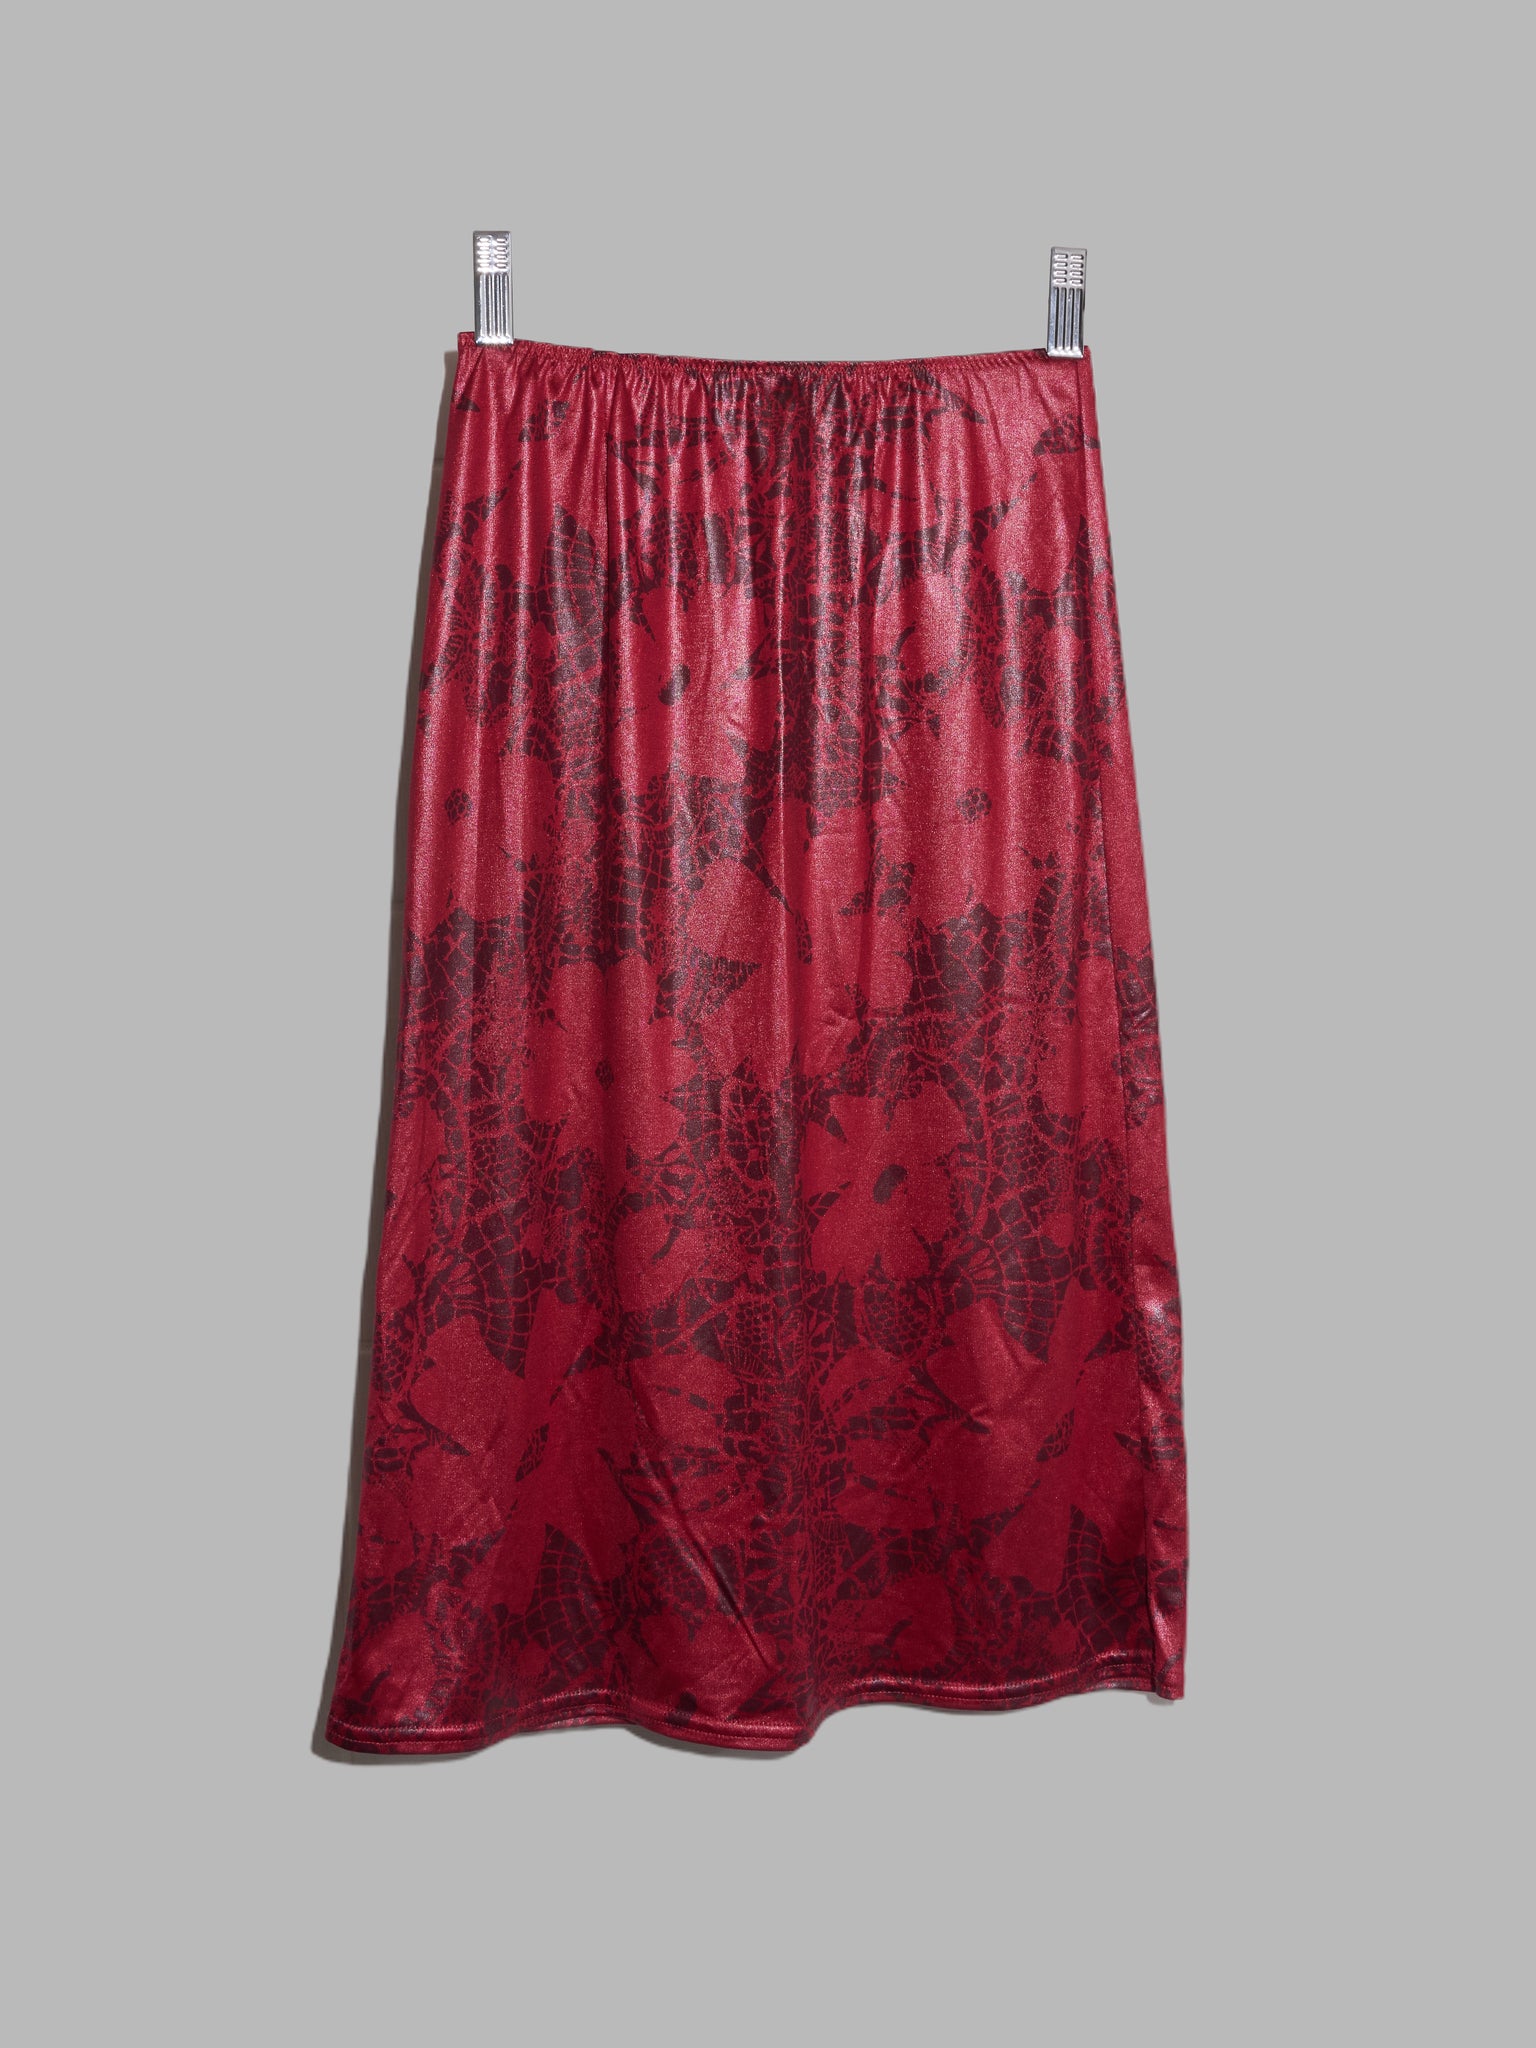 Jean Colonna sheeny red floral print elastic waist skirt - size 40